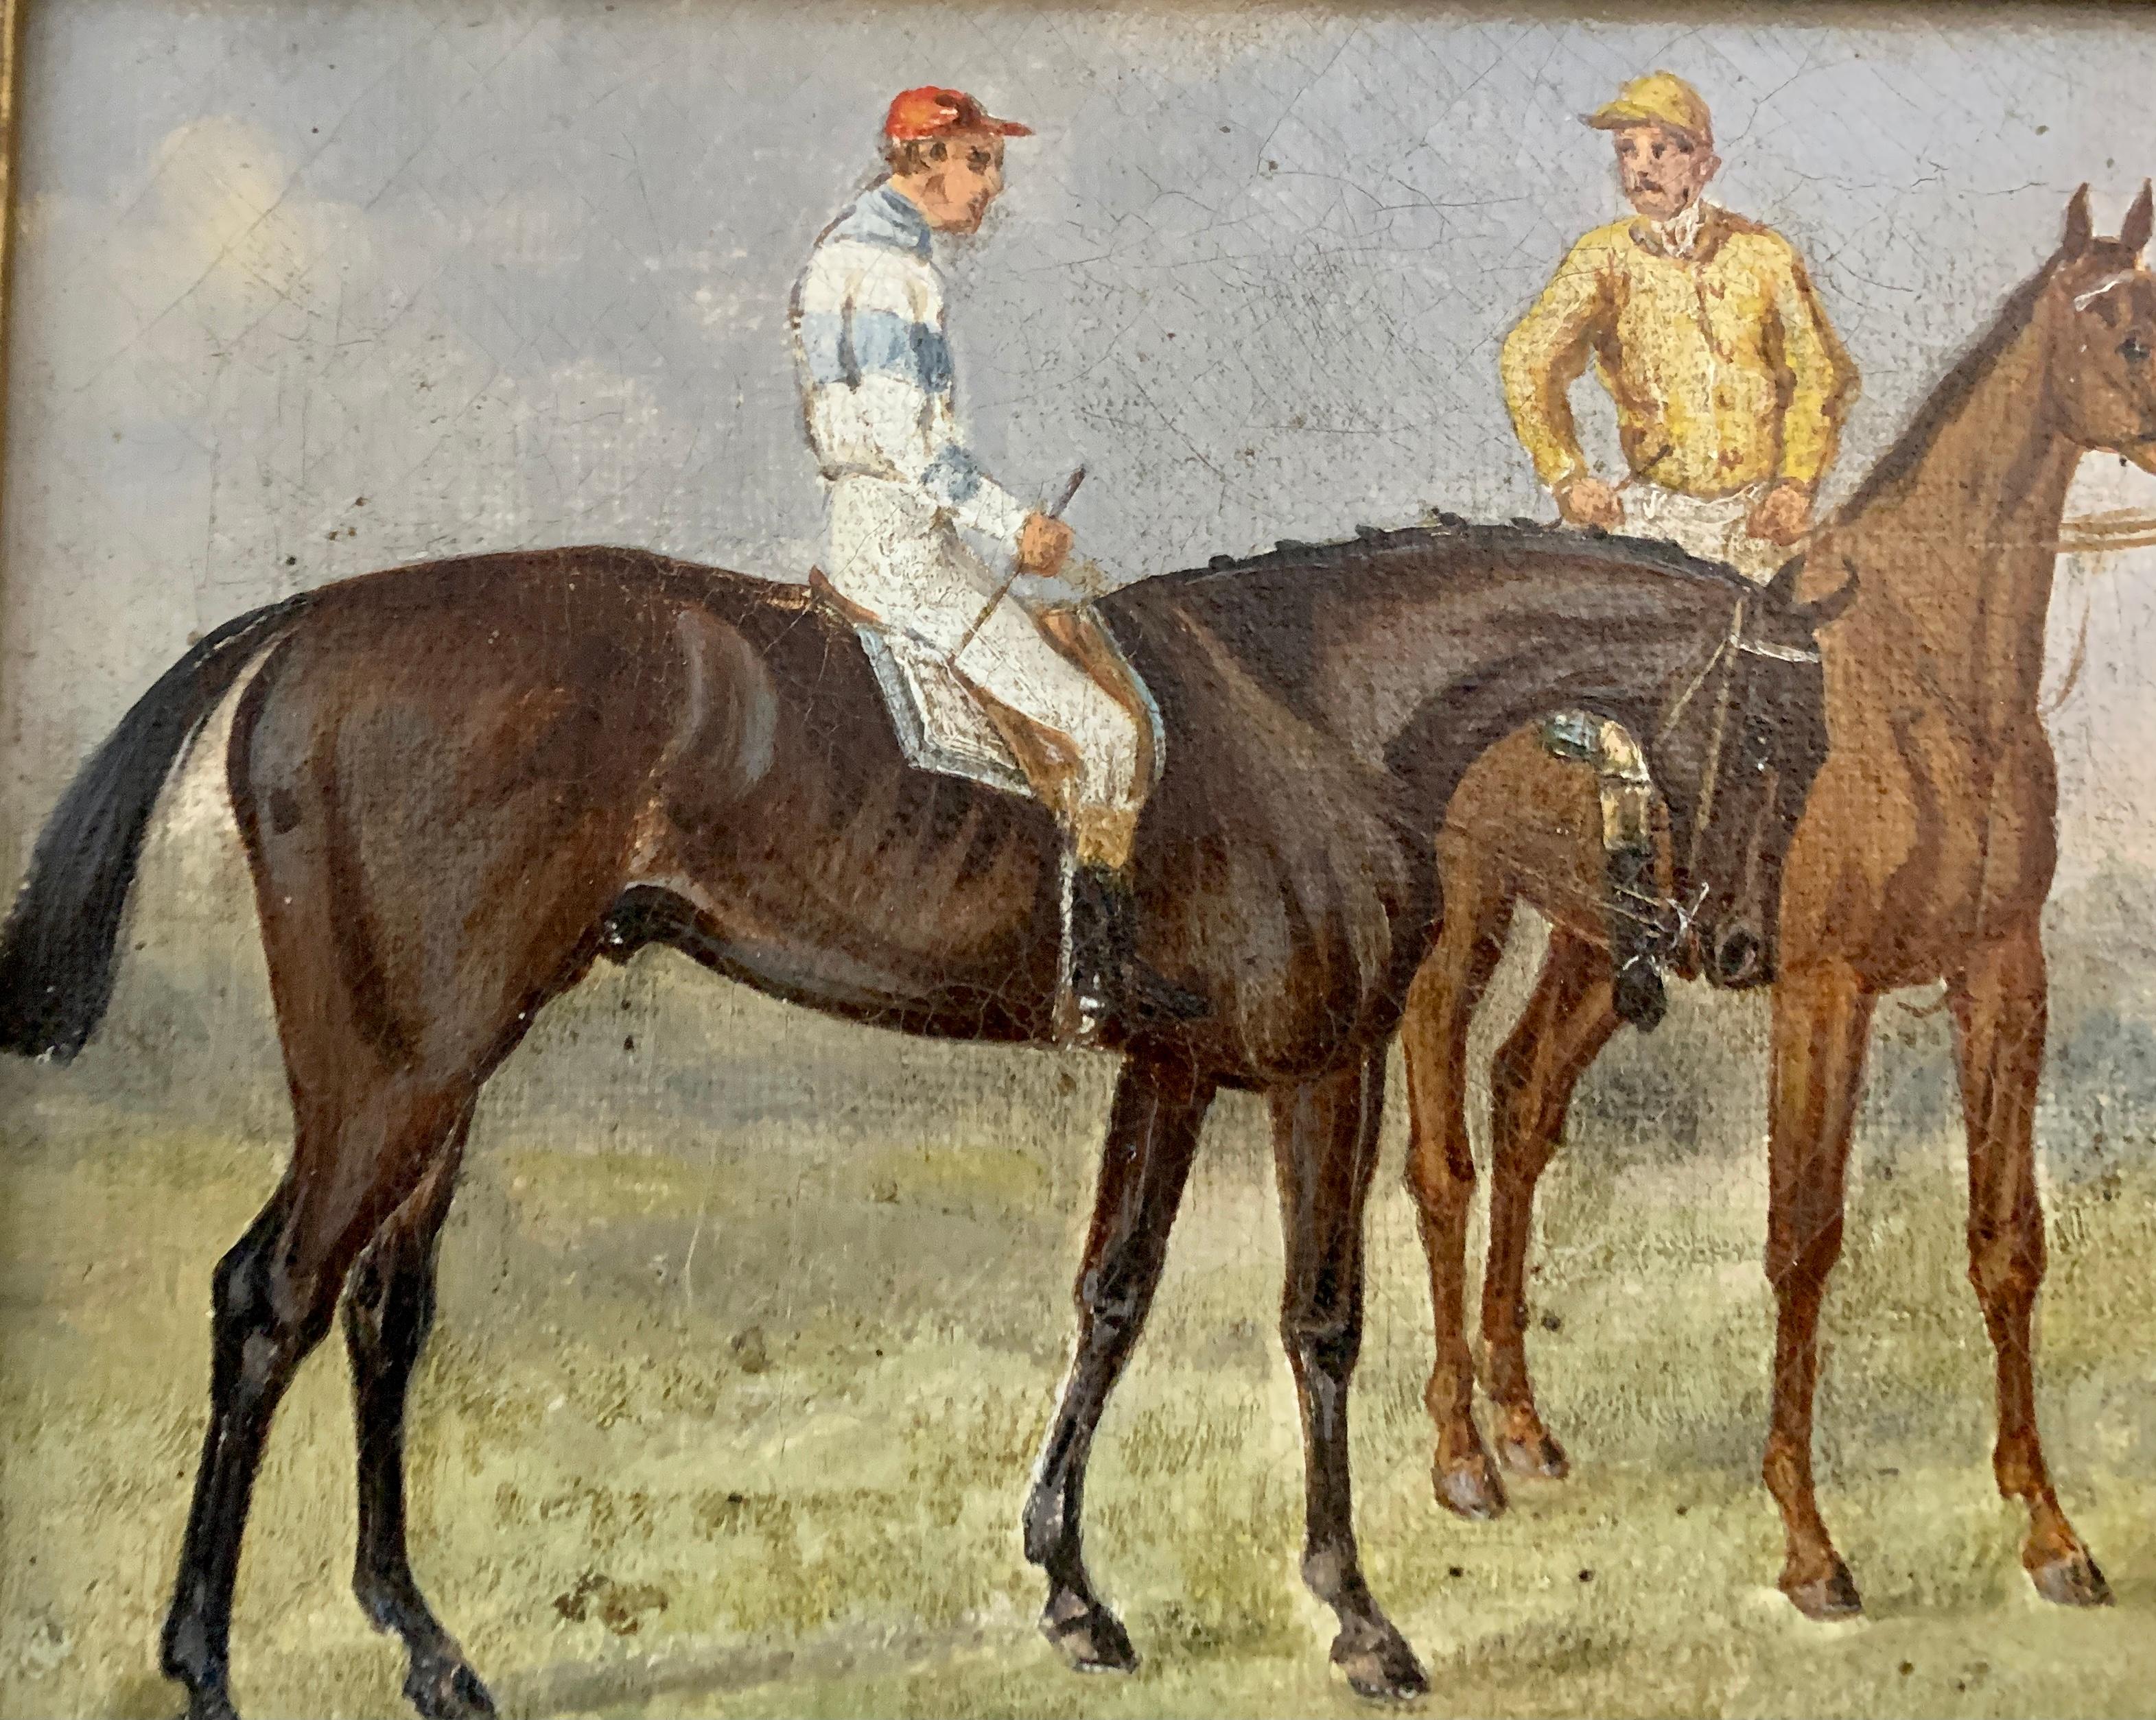 19th century English Horse racing scene with jockeys on horse back in landscape - Brown Figurative Painting by Unknown